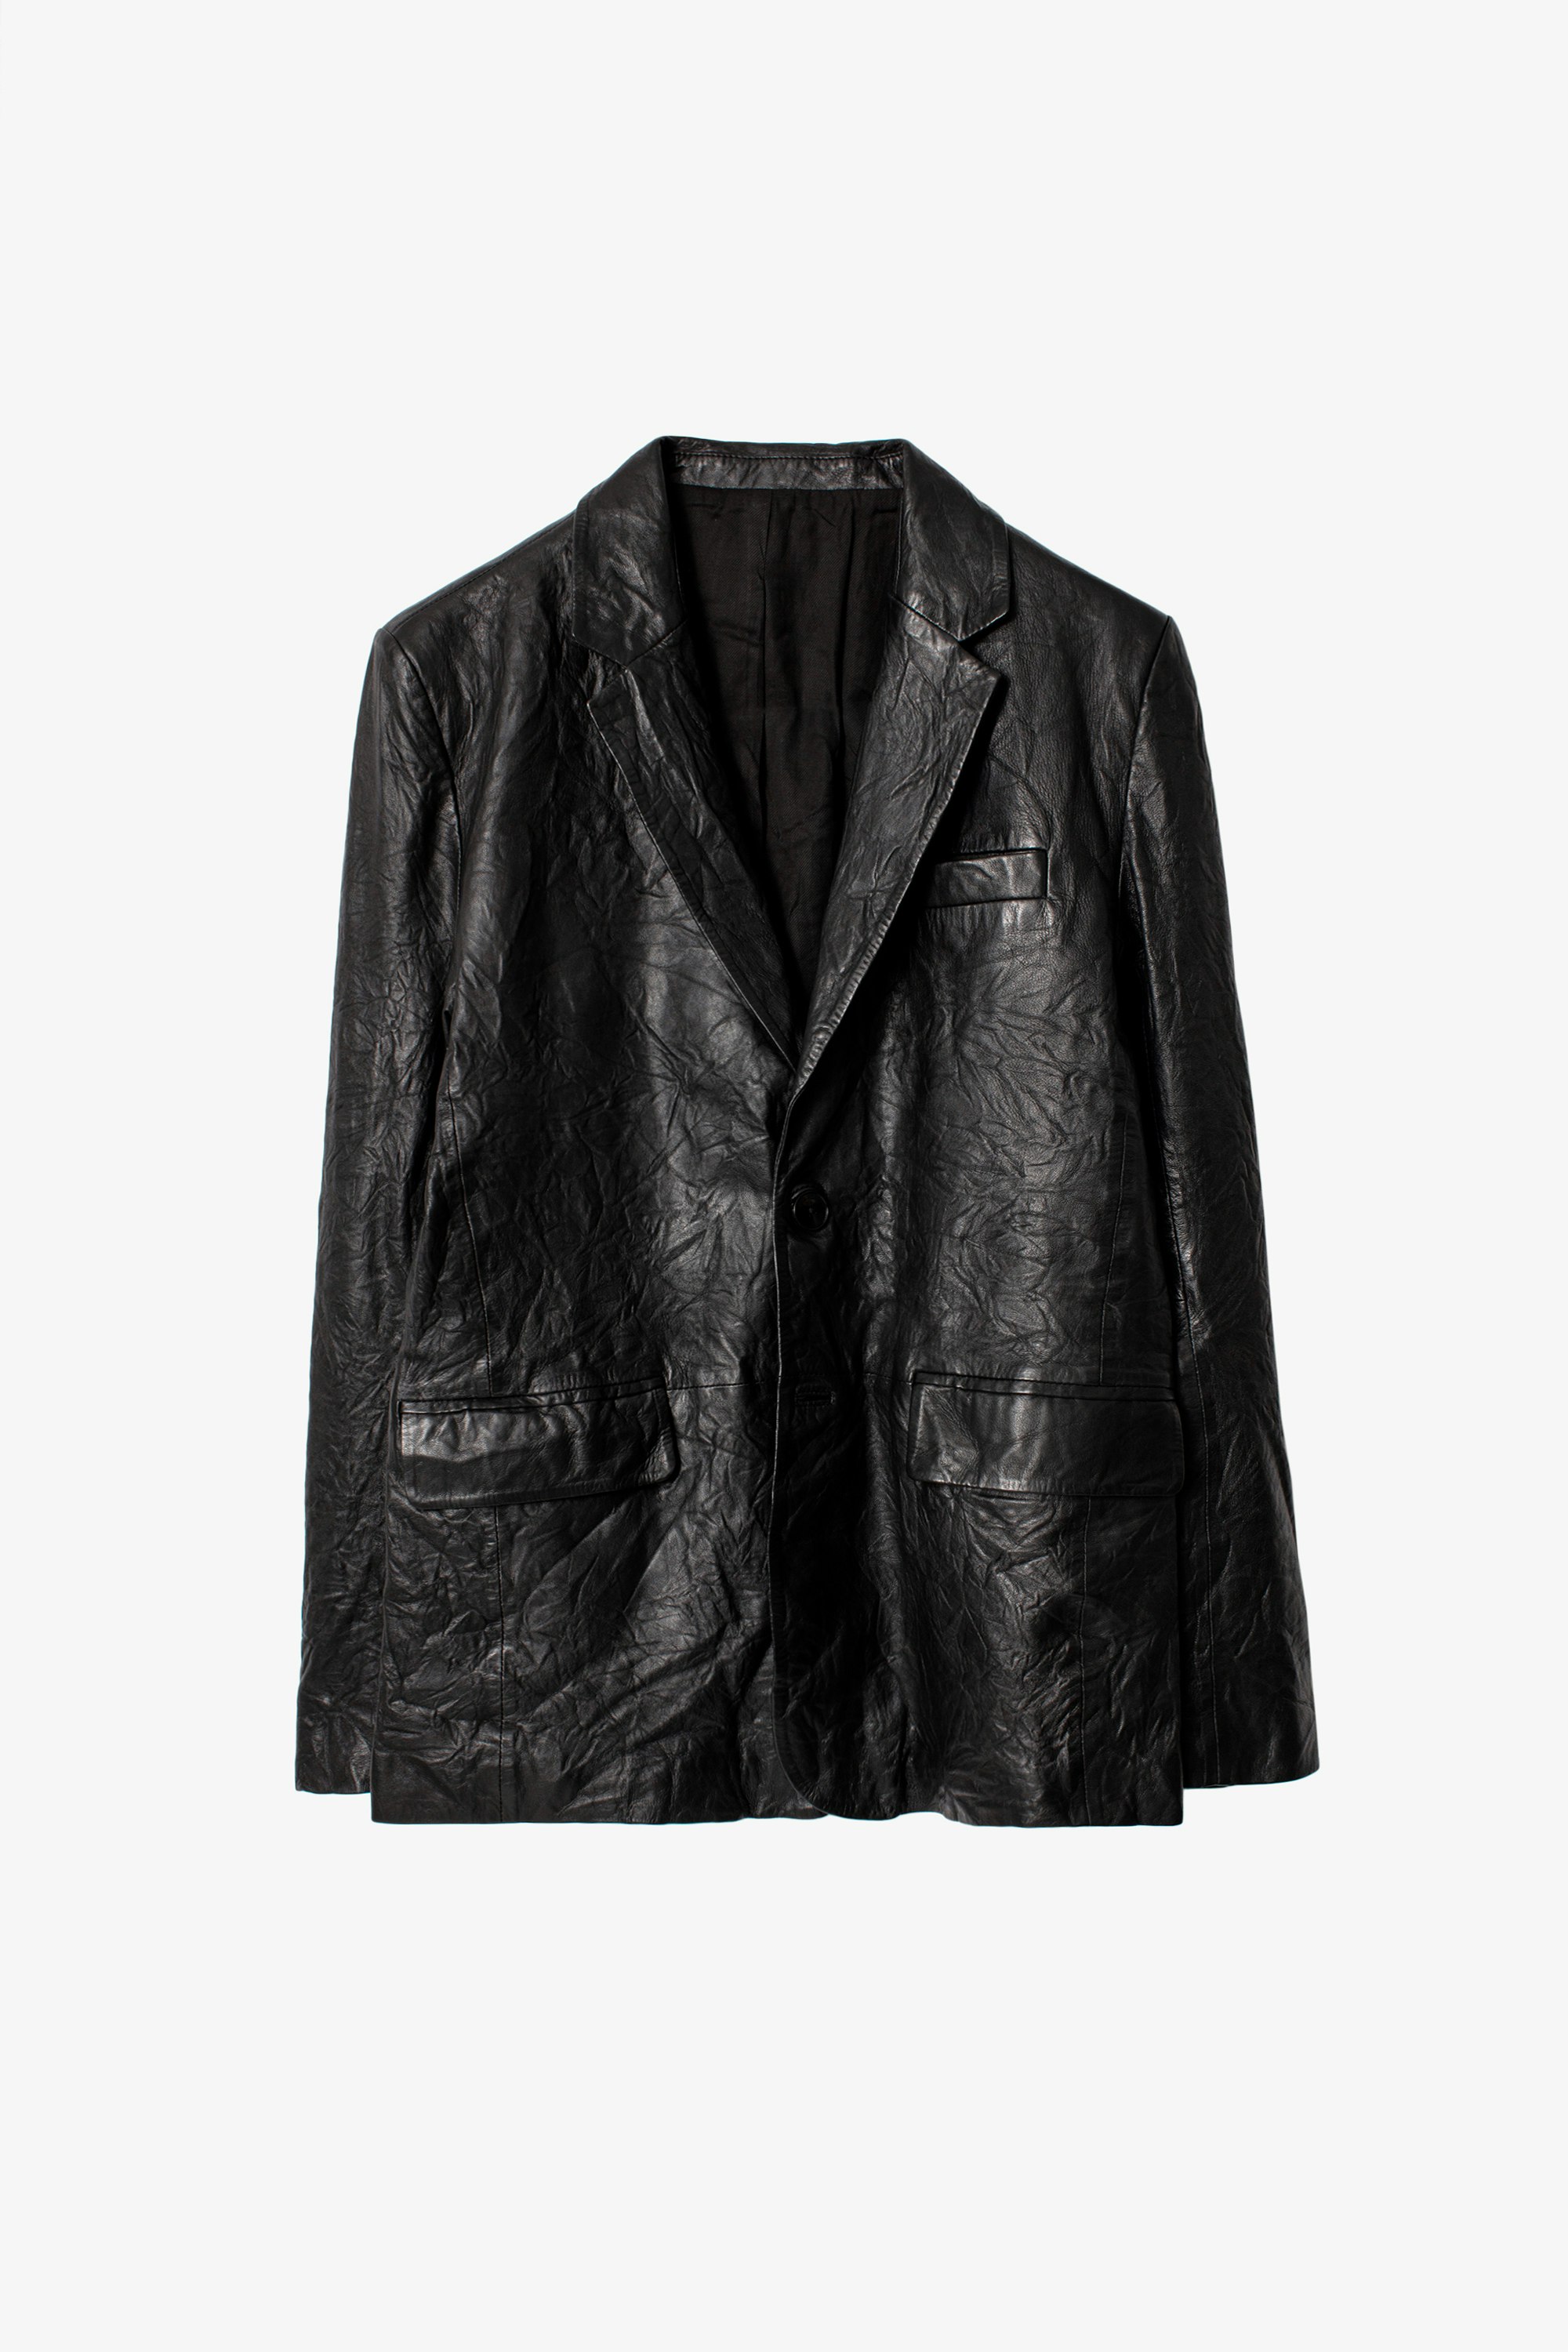 Valfried Crinkle Leather Blazer - Unisex’s black tailored jacket in crinkle leather.